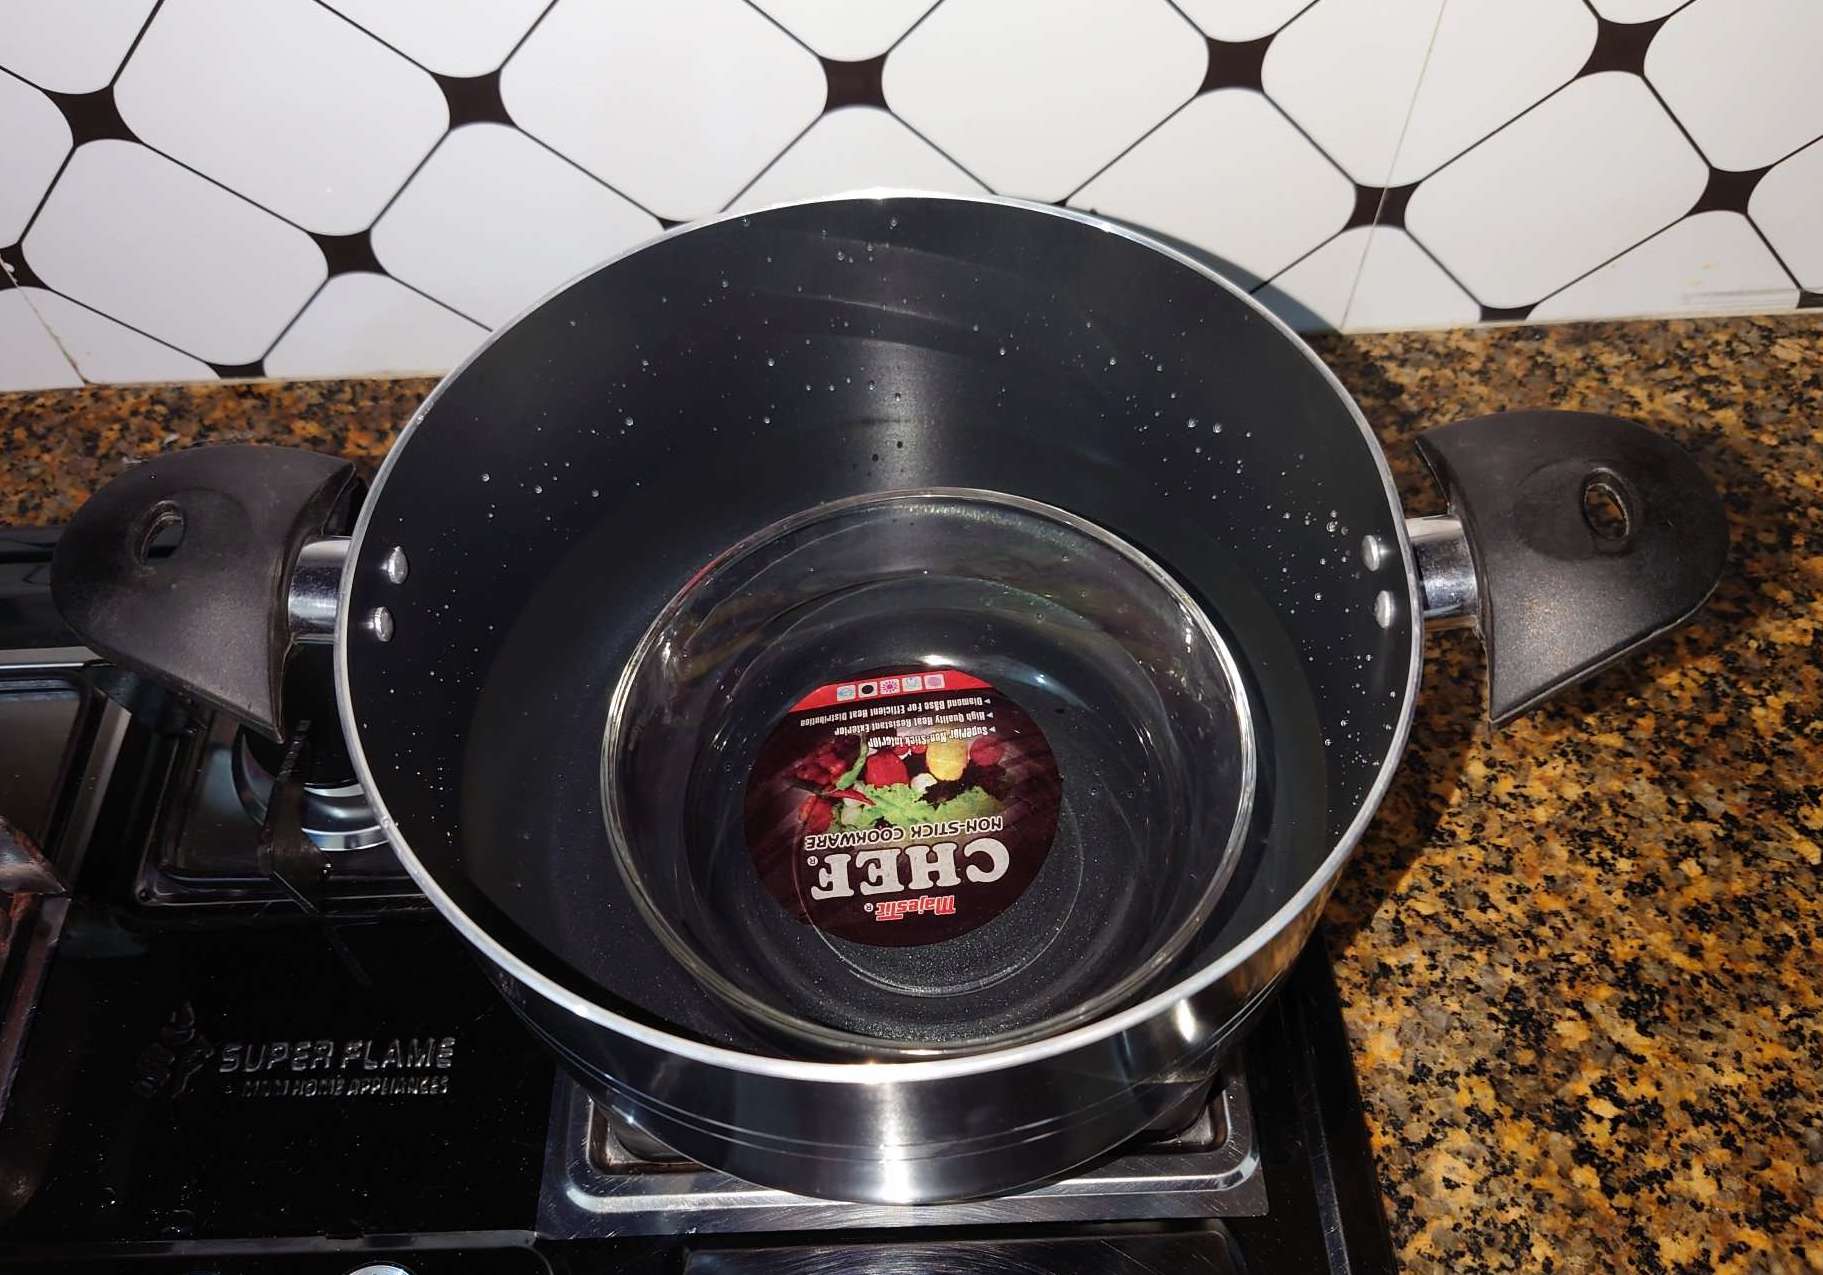 Place the Pot on Stove, Add 6 Cups of Water and Put the Glass Bowl inside of Pot